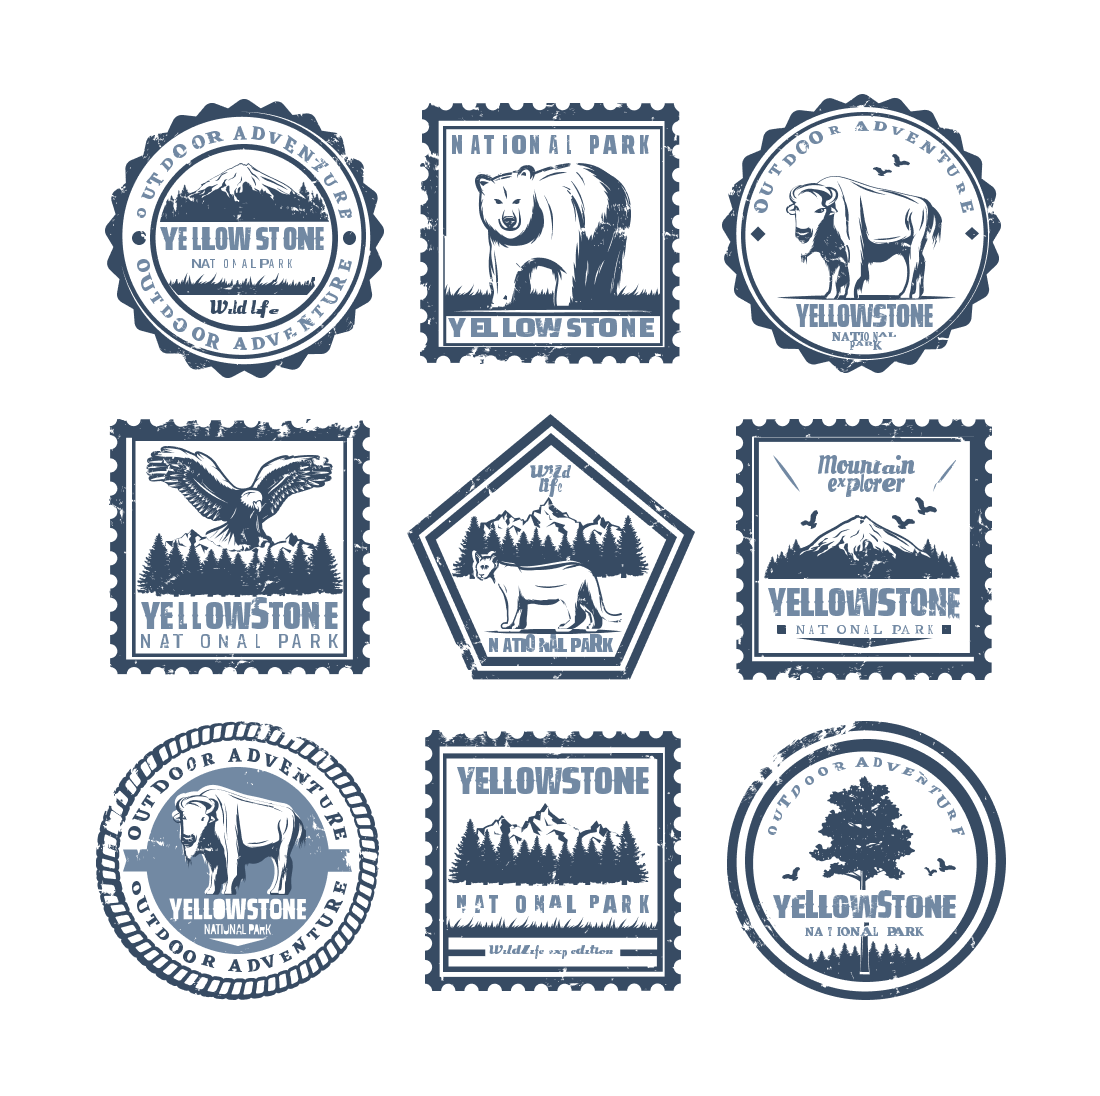 Yellowstone National Park SVG cover.